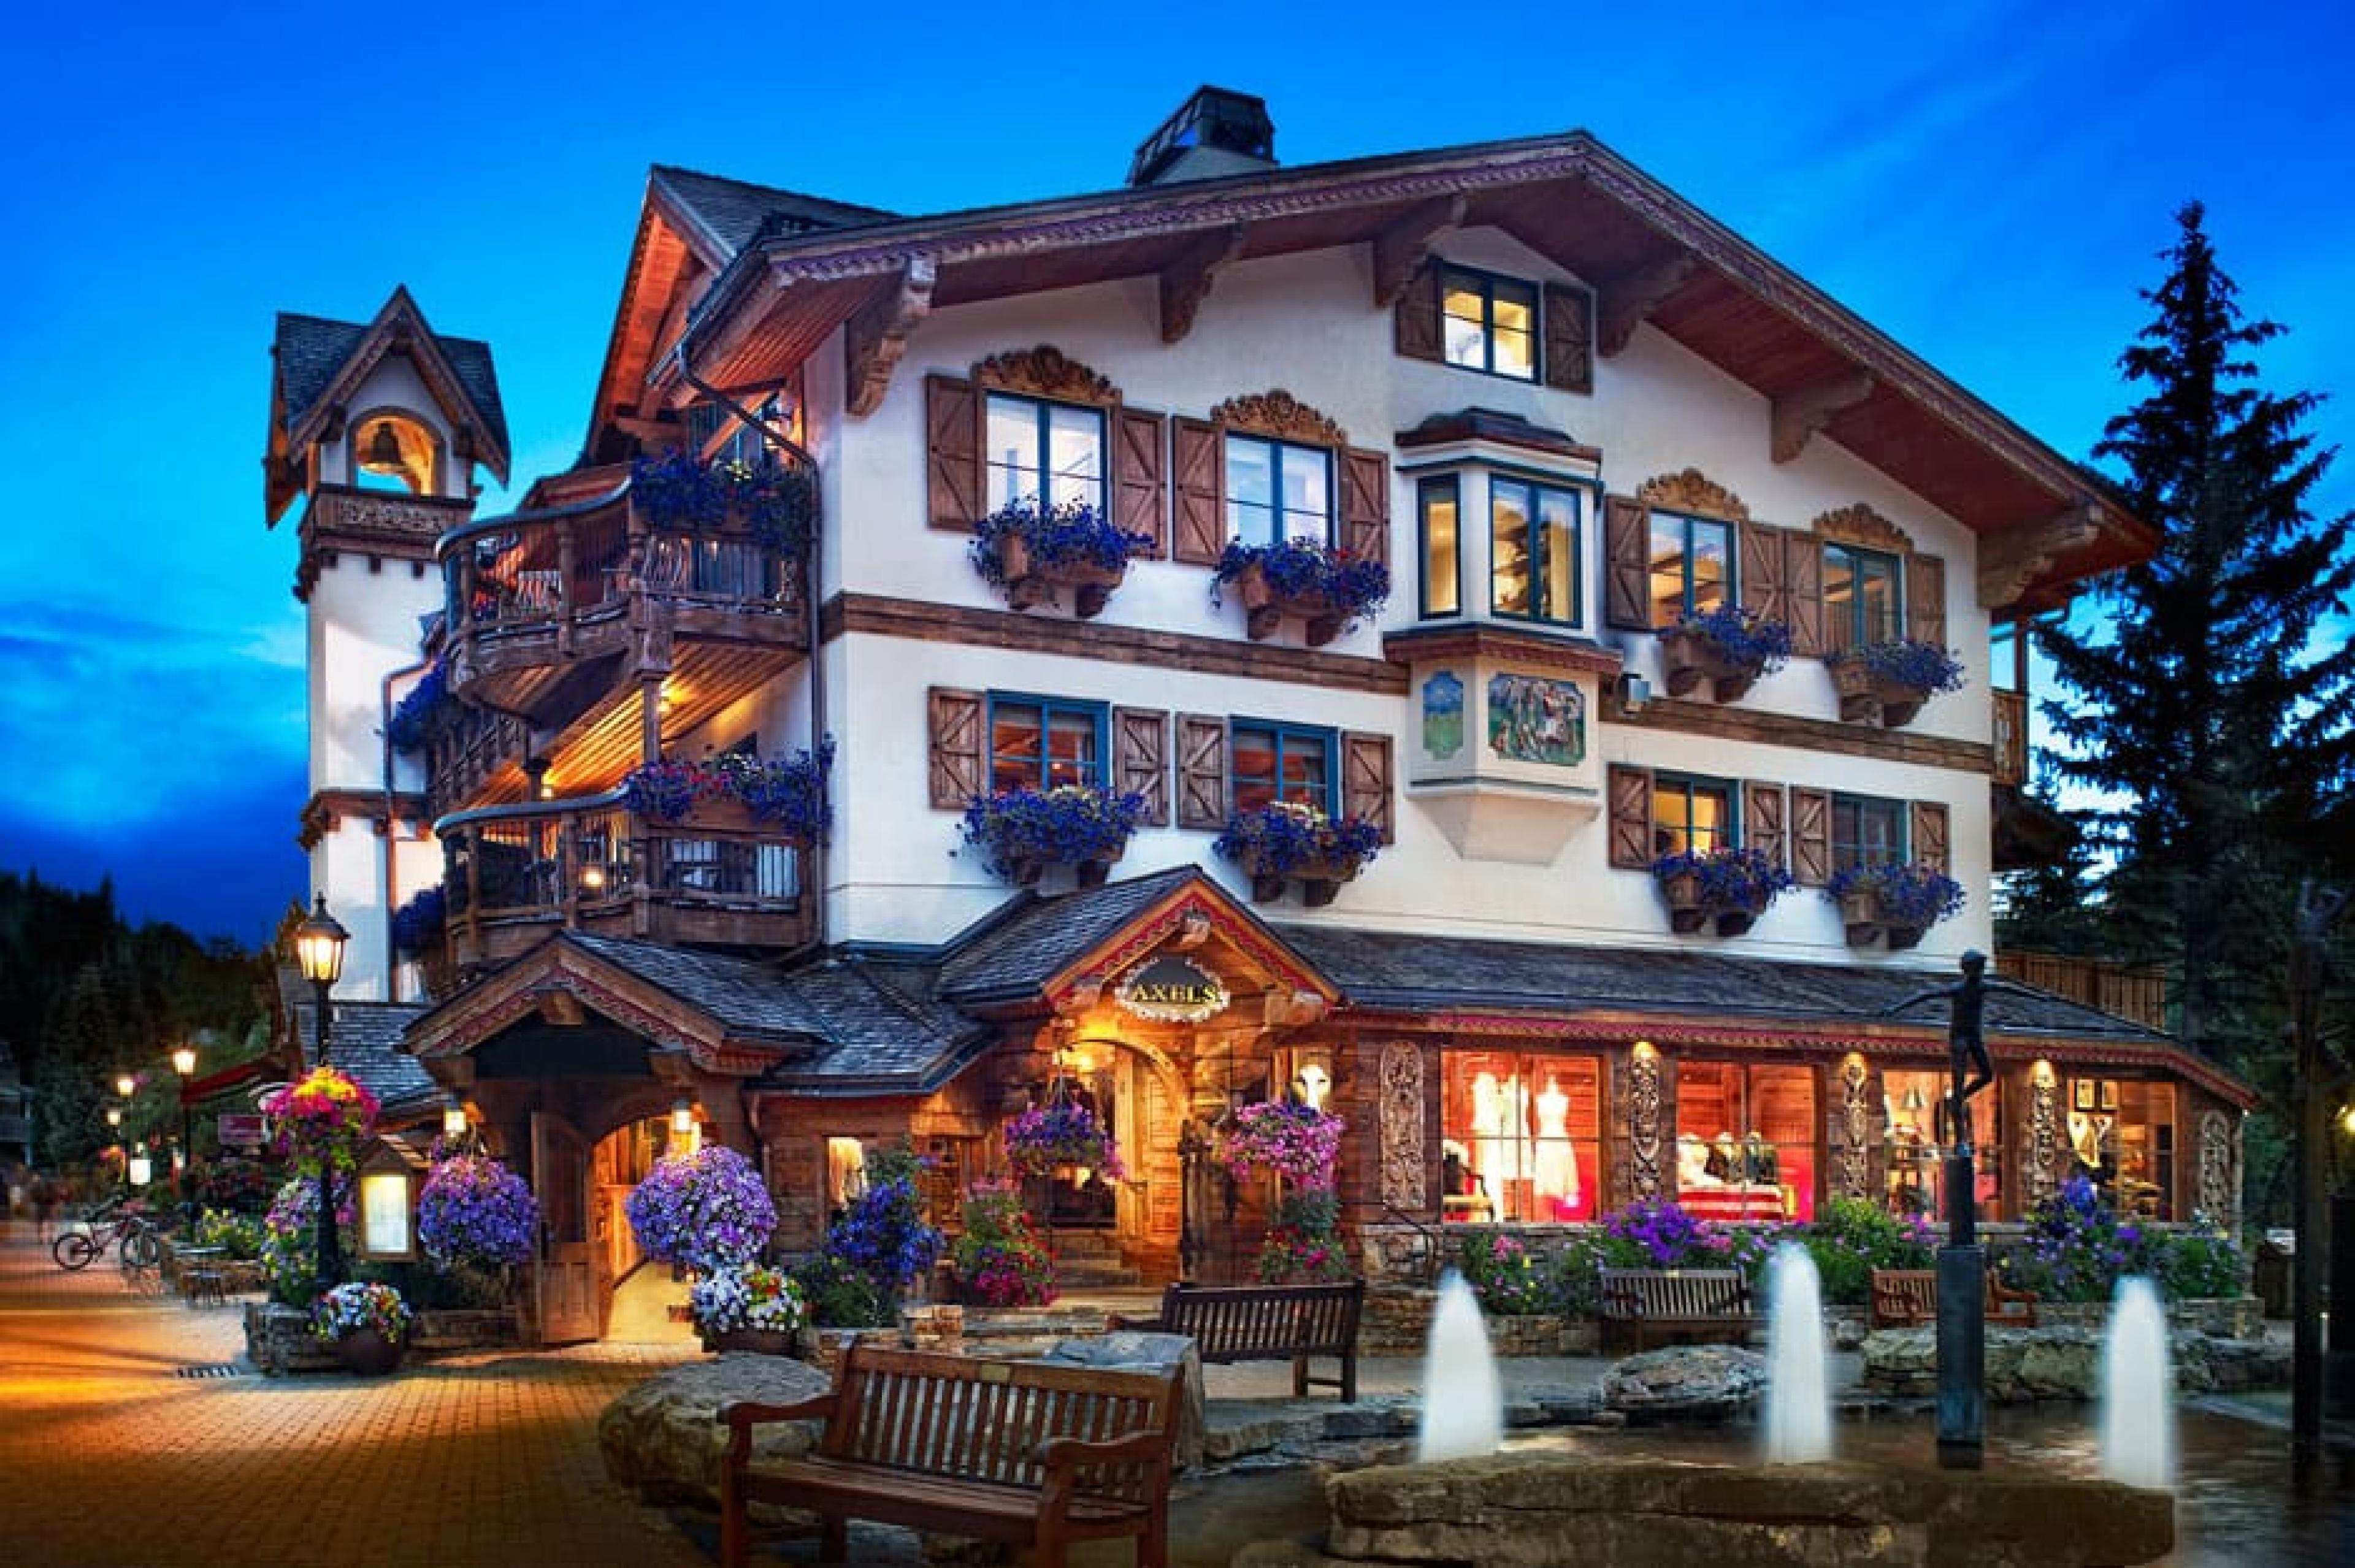 Exterior View - Axel’s, Vail, American West